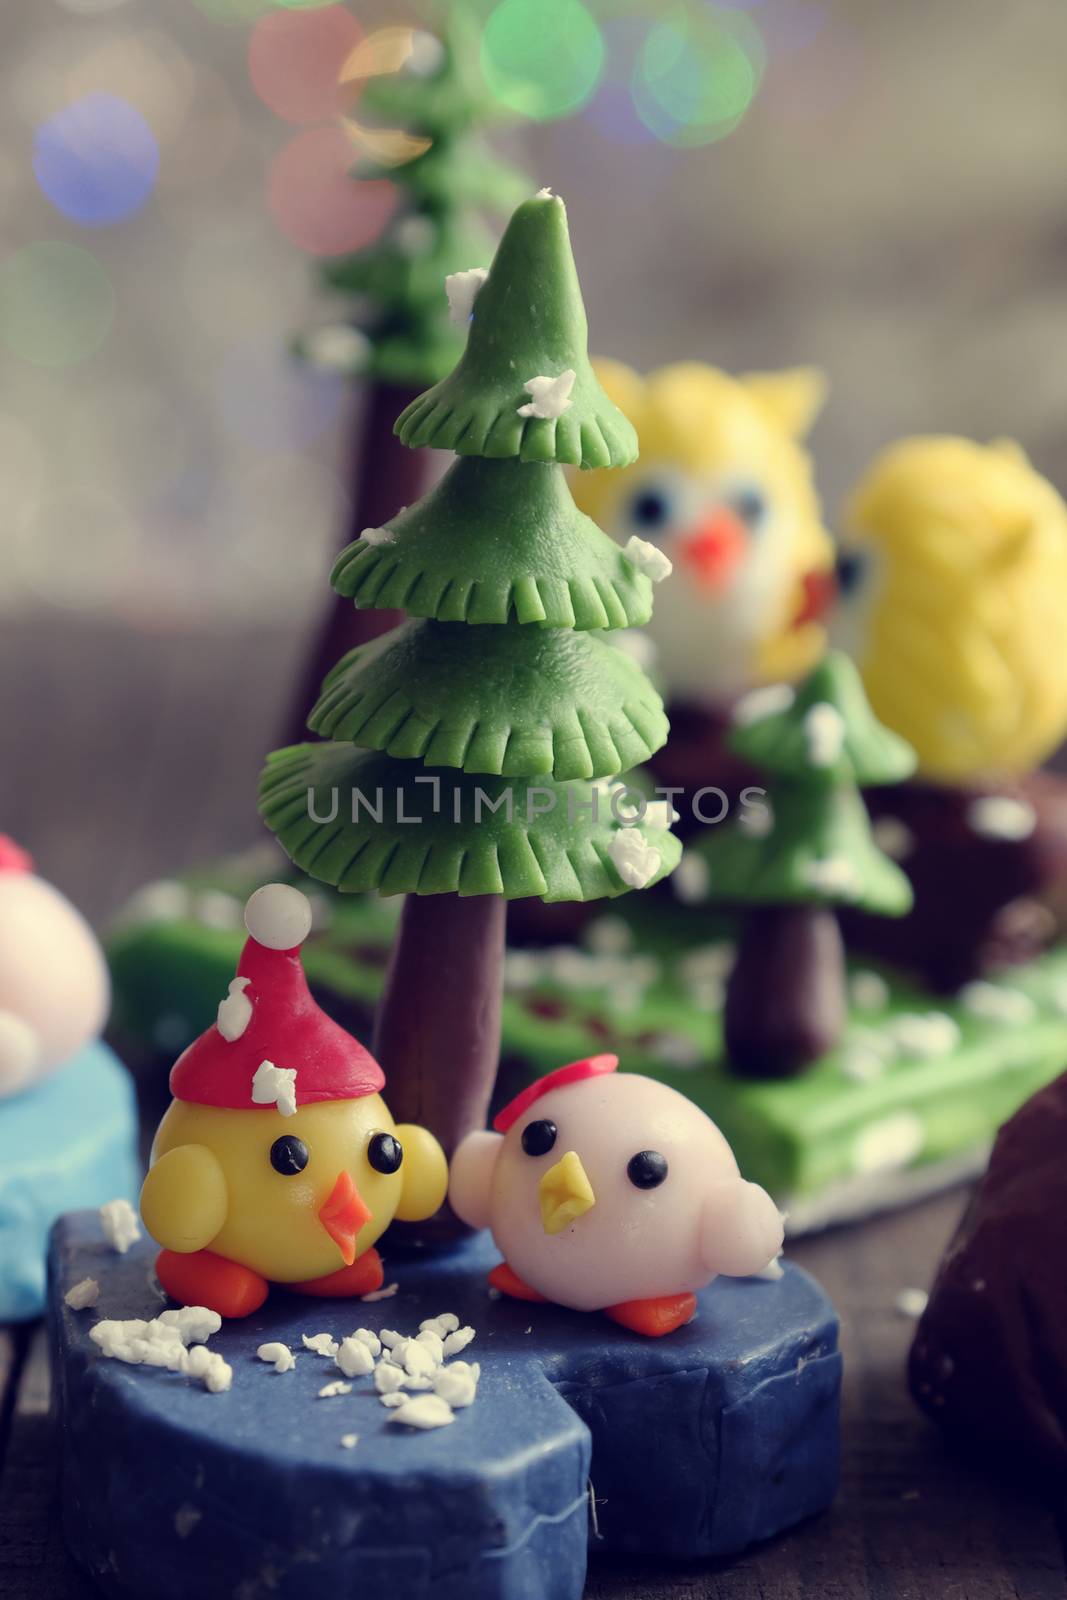 diy Xmas ornament to decor in winter holiday by xuanhuongho